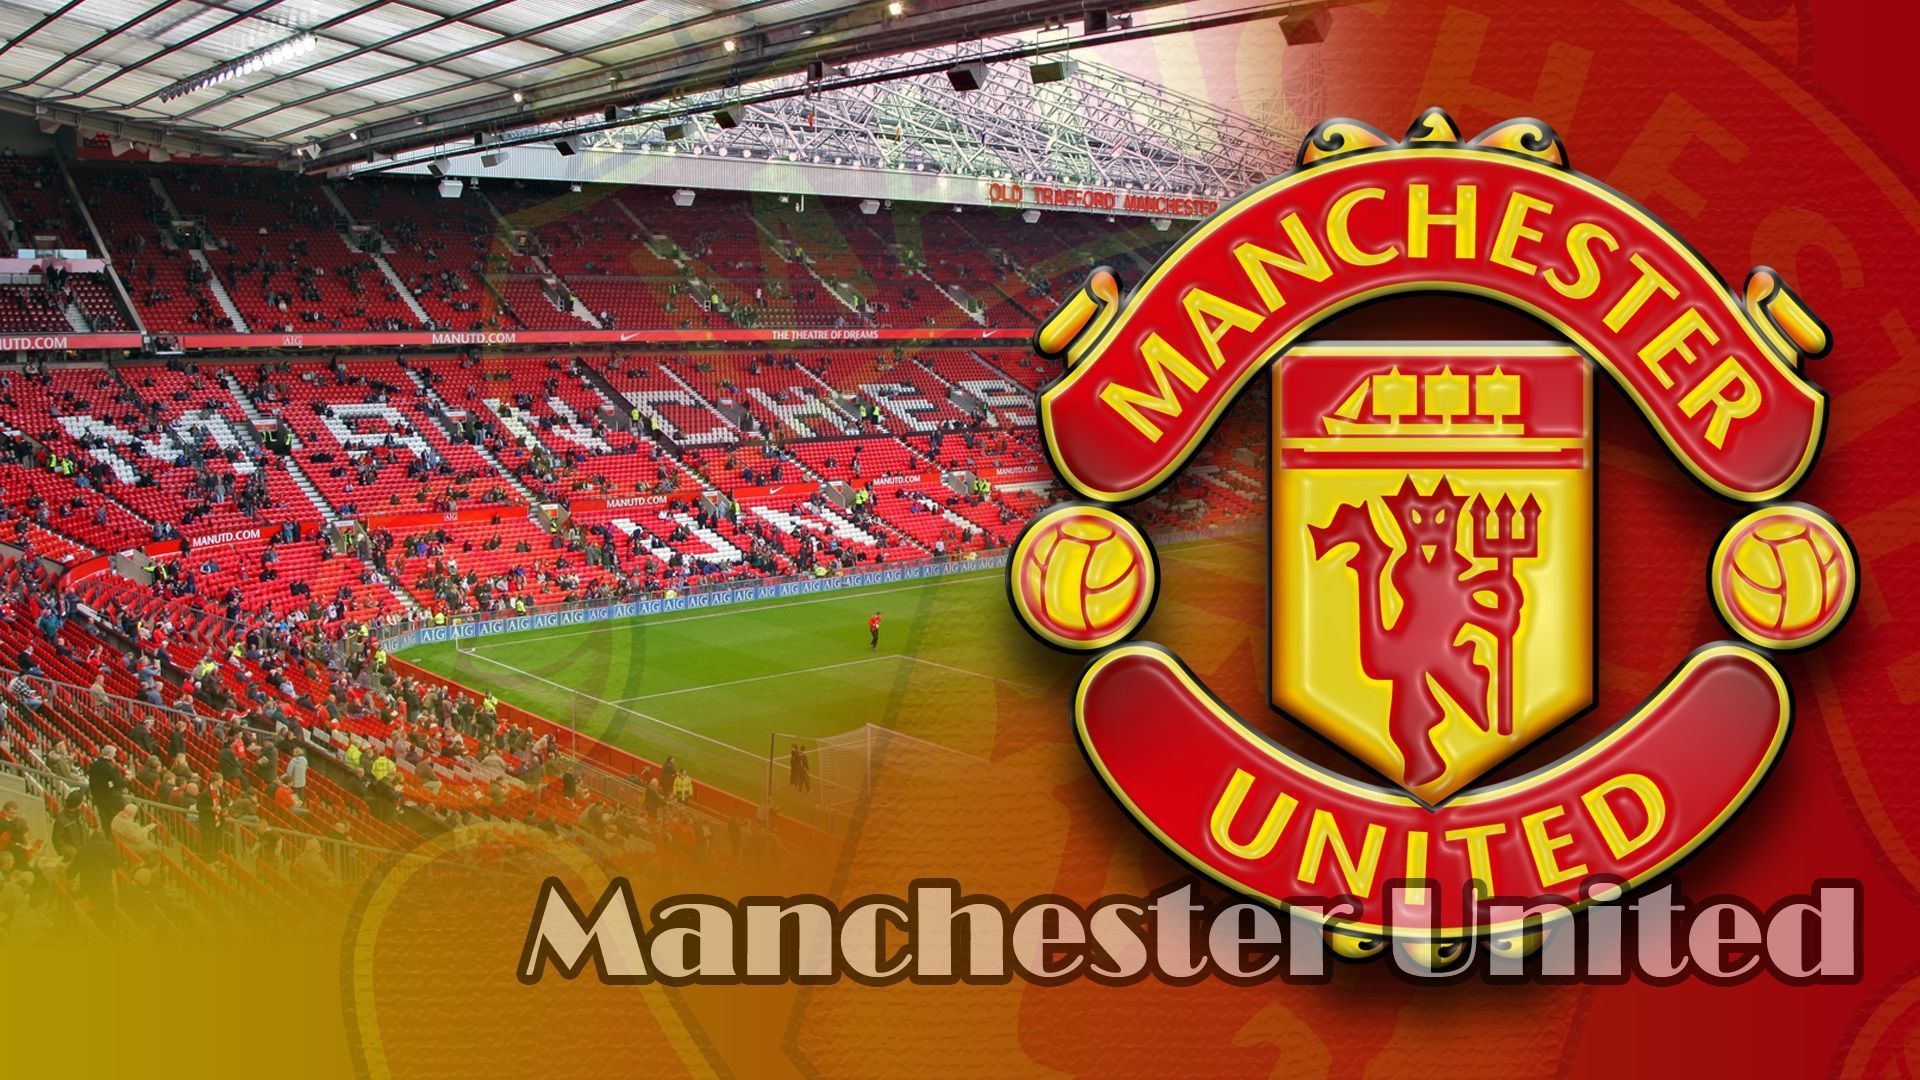 Manchester-United-Free-HD-Wallpapers | Download Free Desktop ...